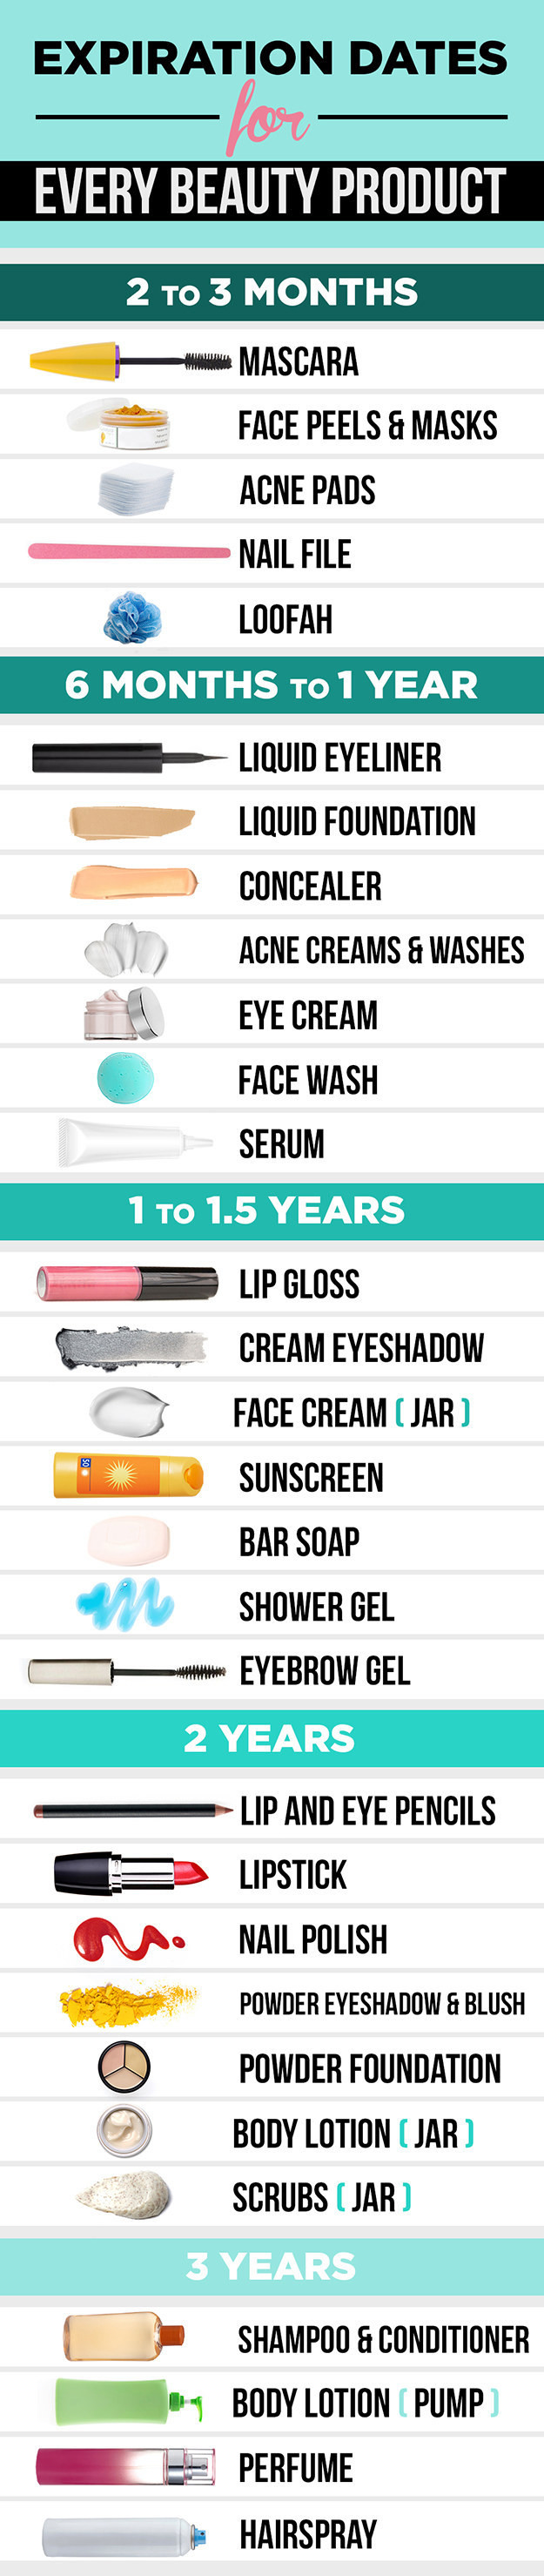 expiration dates for beauty products